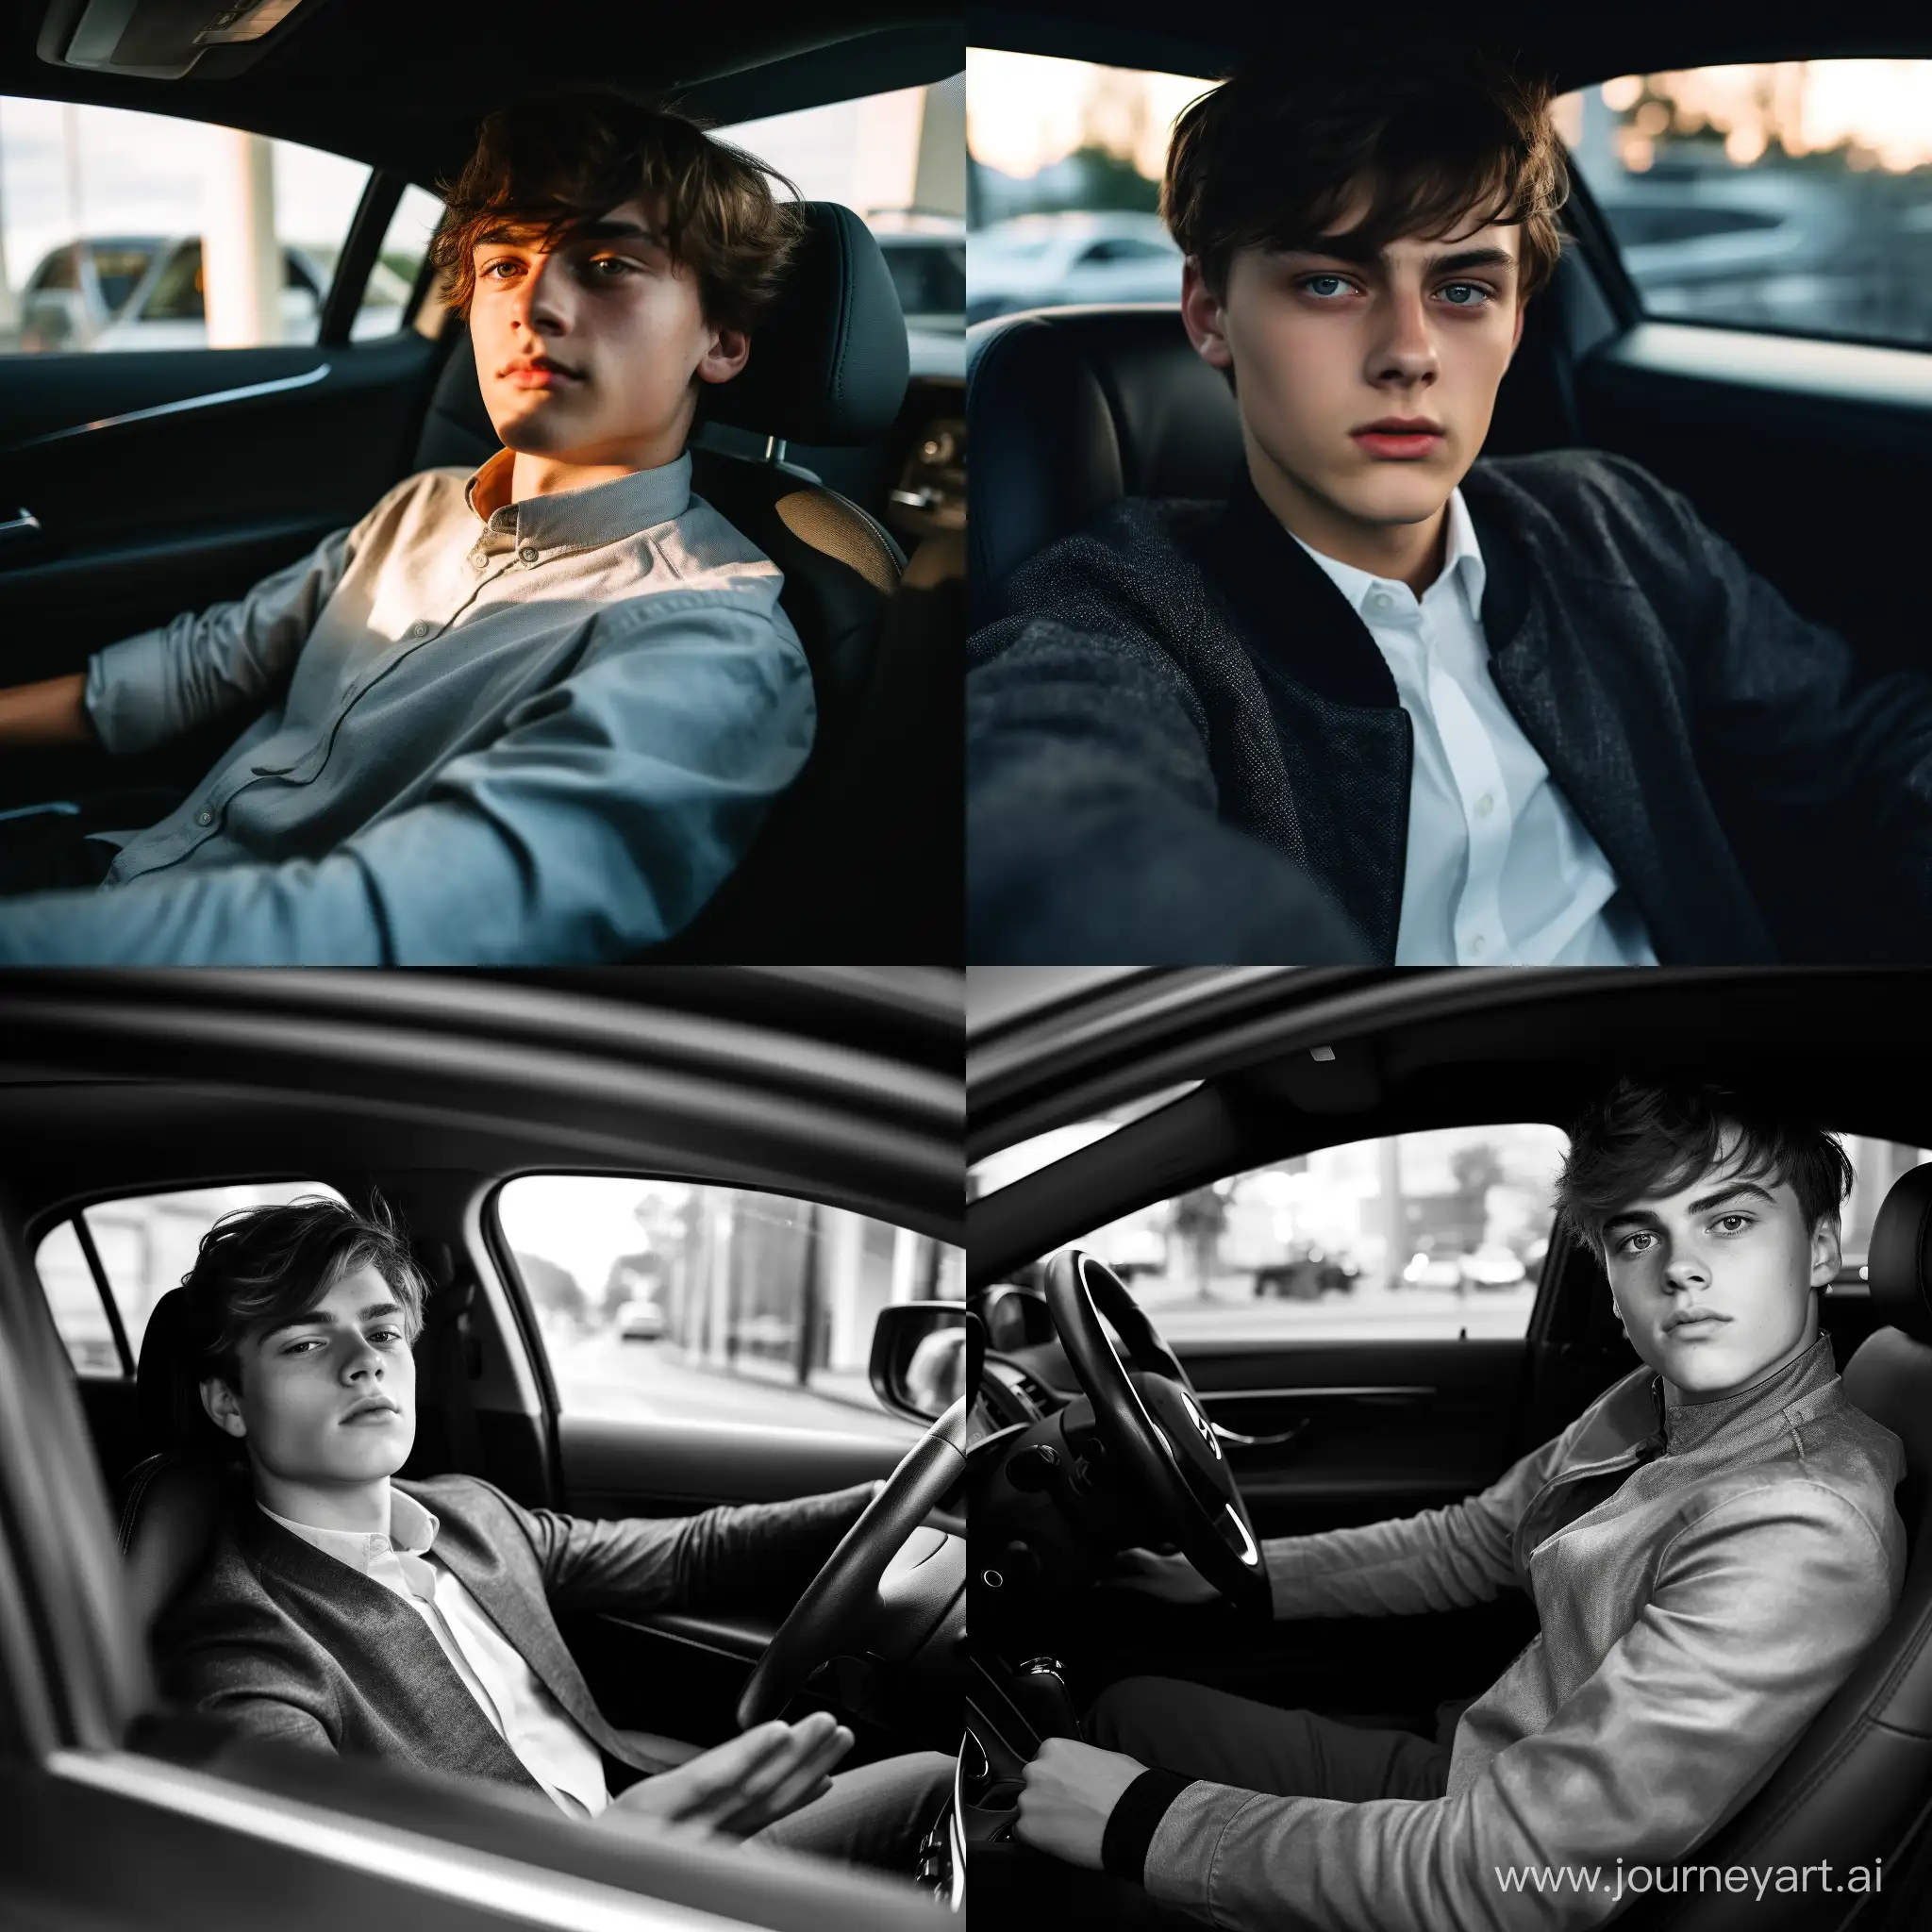 A sophisticated, realistic 4k cinematic photo, teenager, Not a mature 16 years old. European appearance with classical darkbrown medium length Fringe haircut. He's wearing brand-new casual clothes in black and white tones color. He is sitting in back seat of Mercedes maybach car, long exposure, close-up portrait In the style of 35mm film